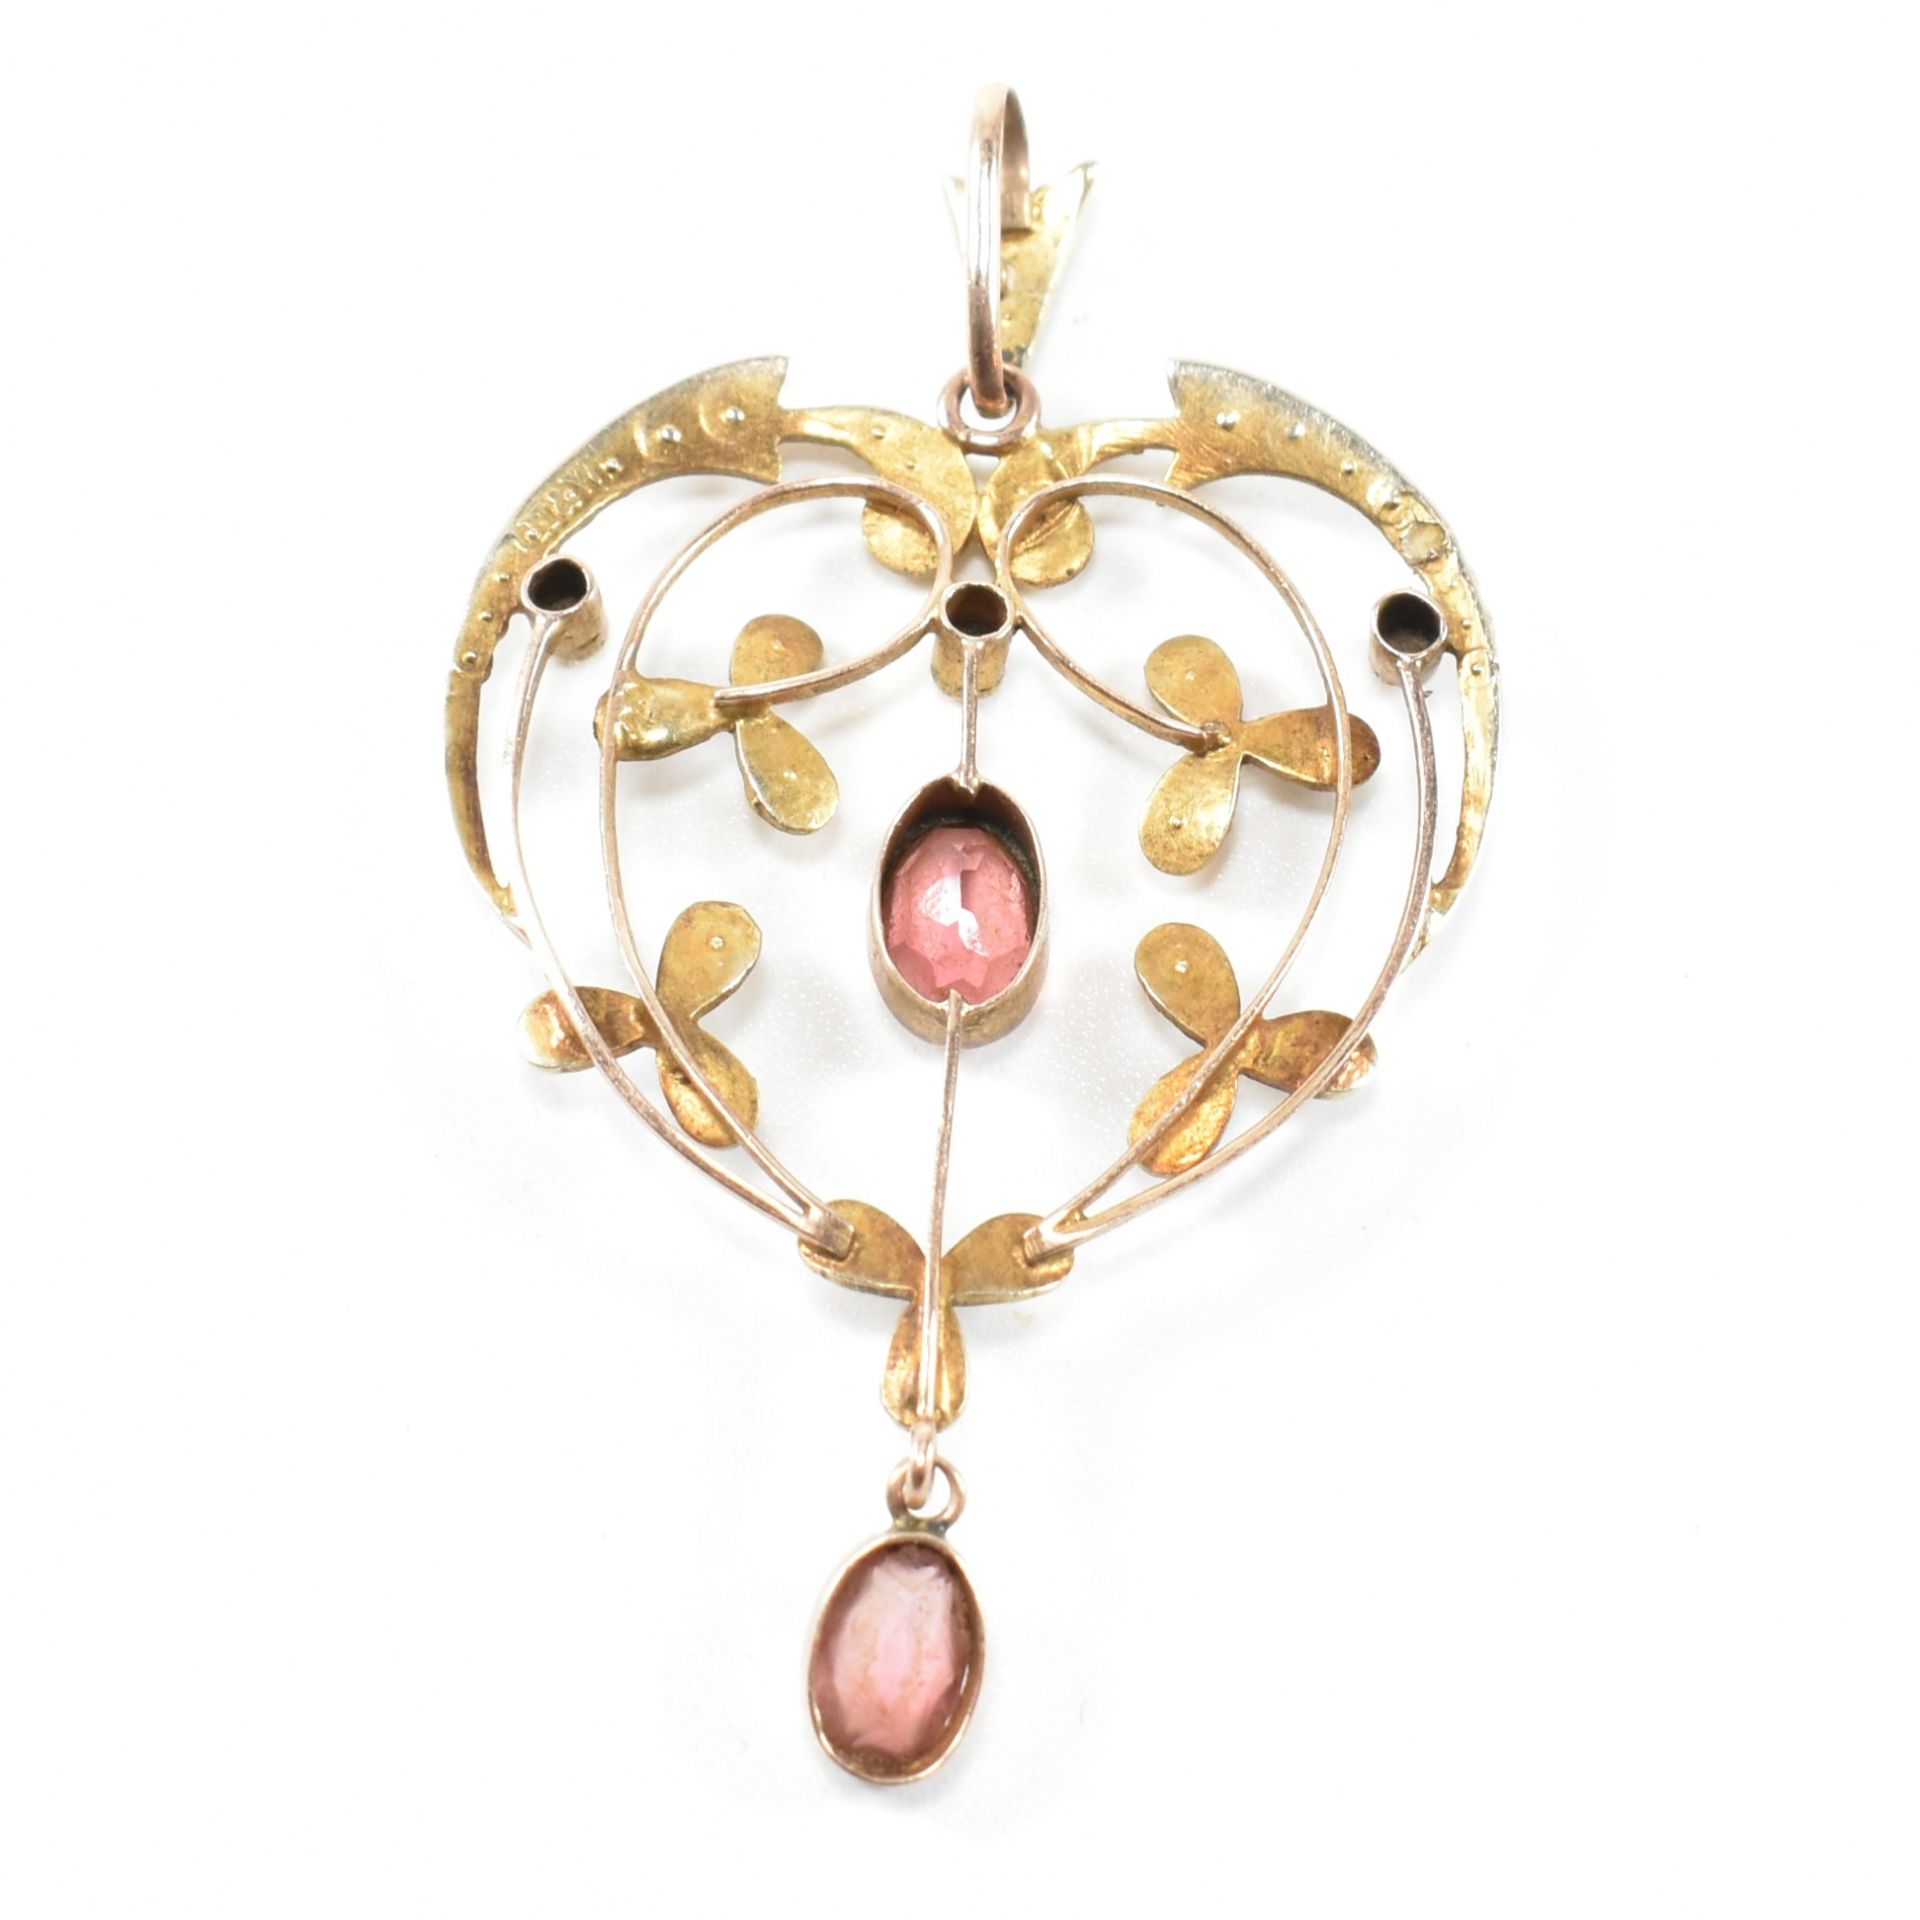 EDWARDIAN 9CT GOLD TOURMALINE & SEED PEARL NECKLACE PENDANT - Image 2 of 3